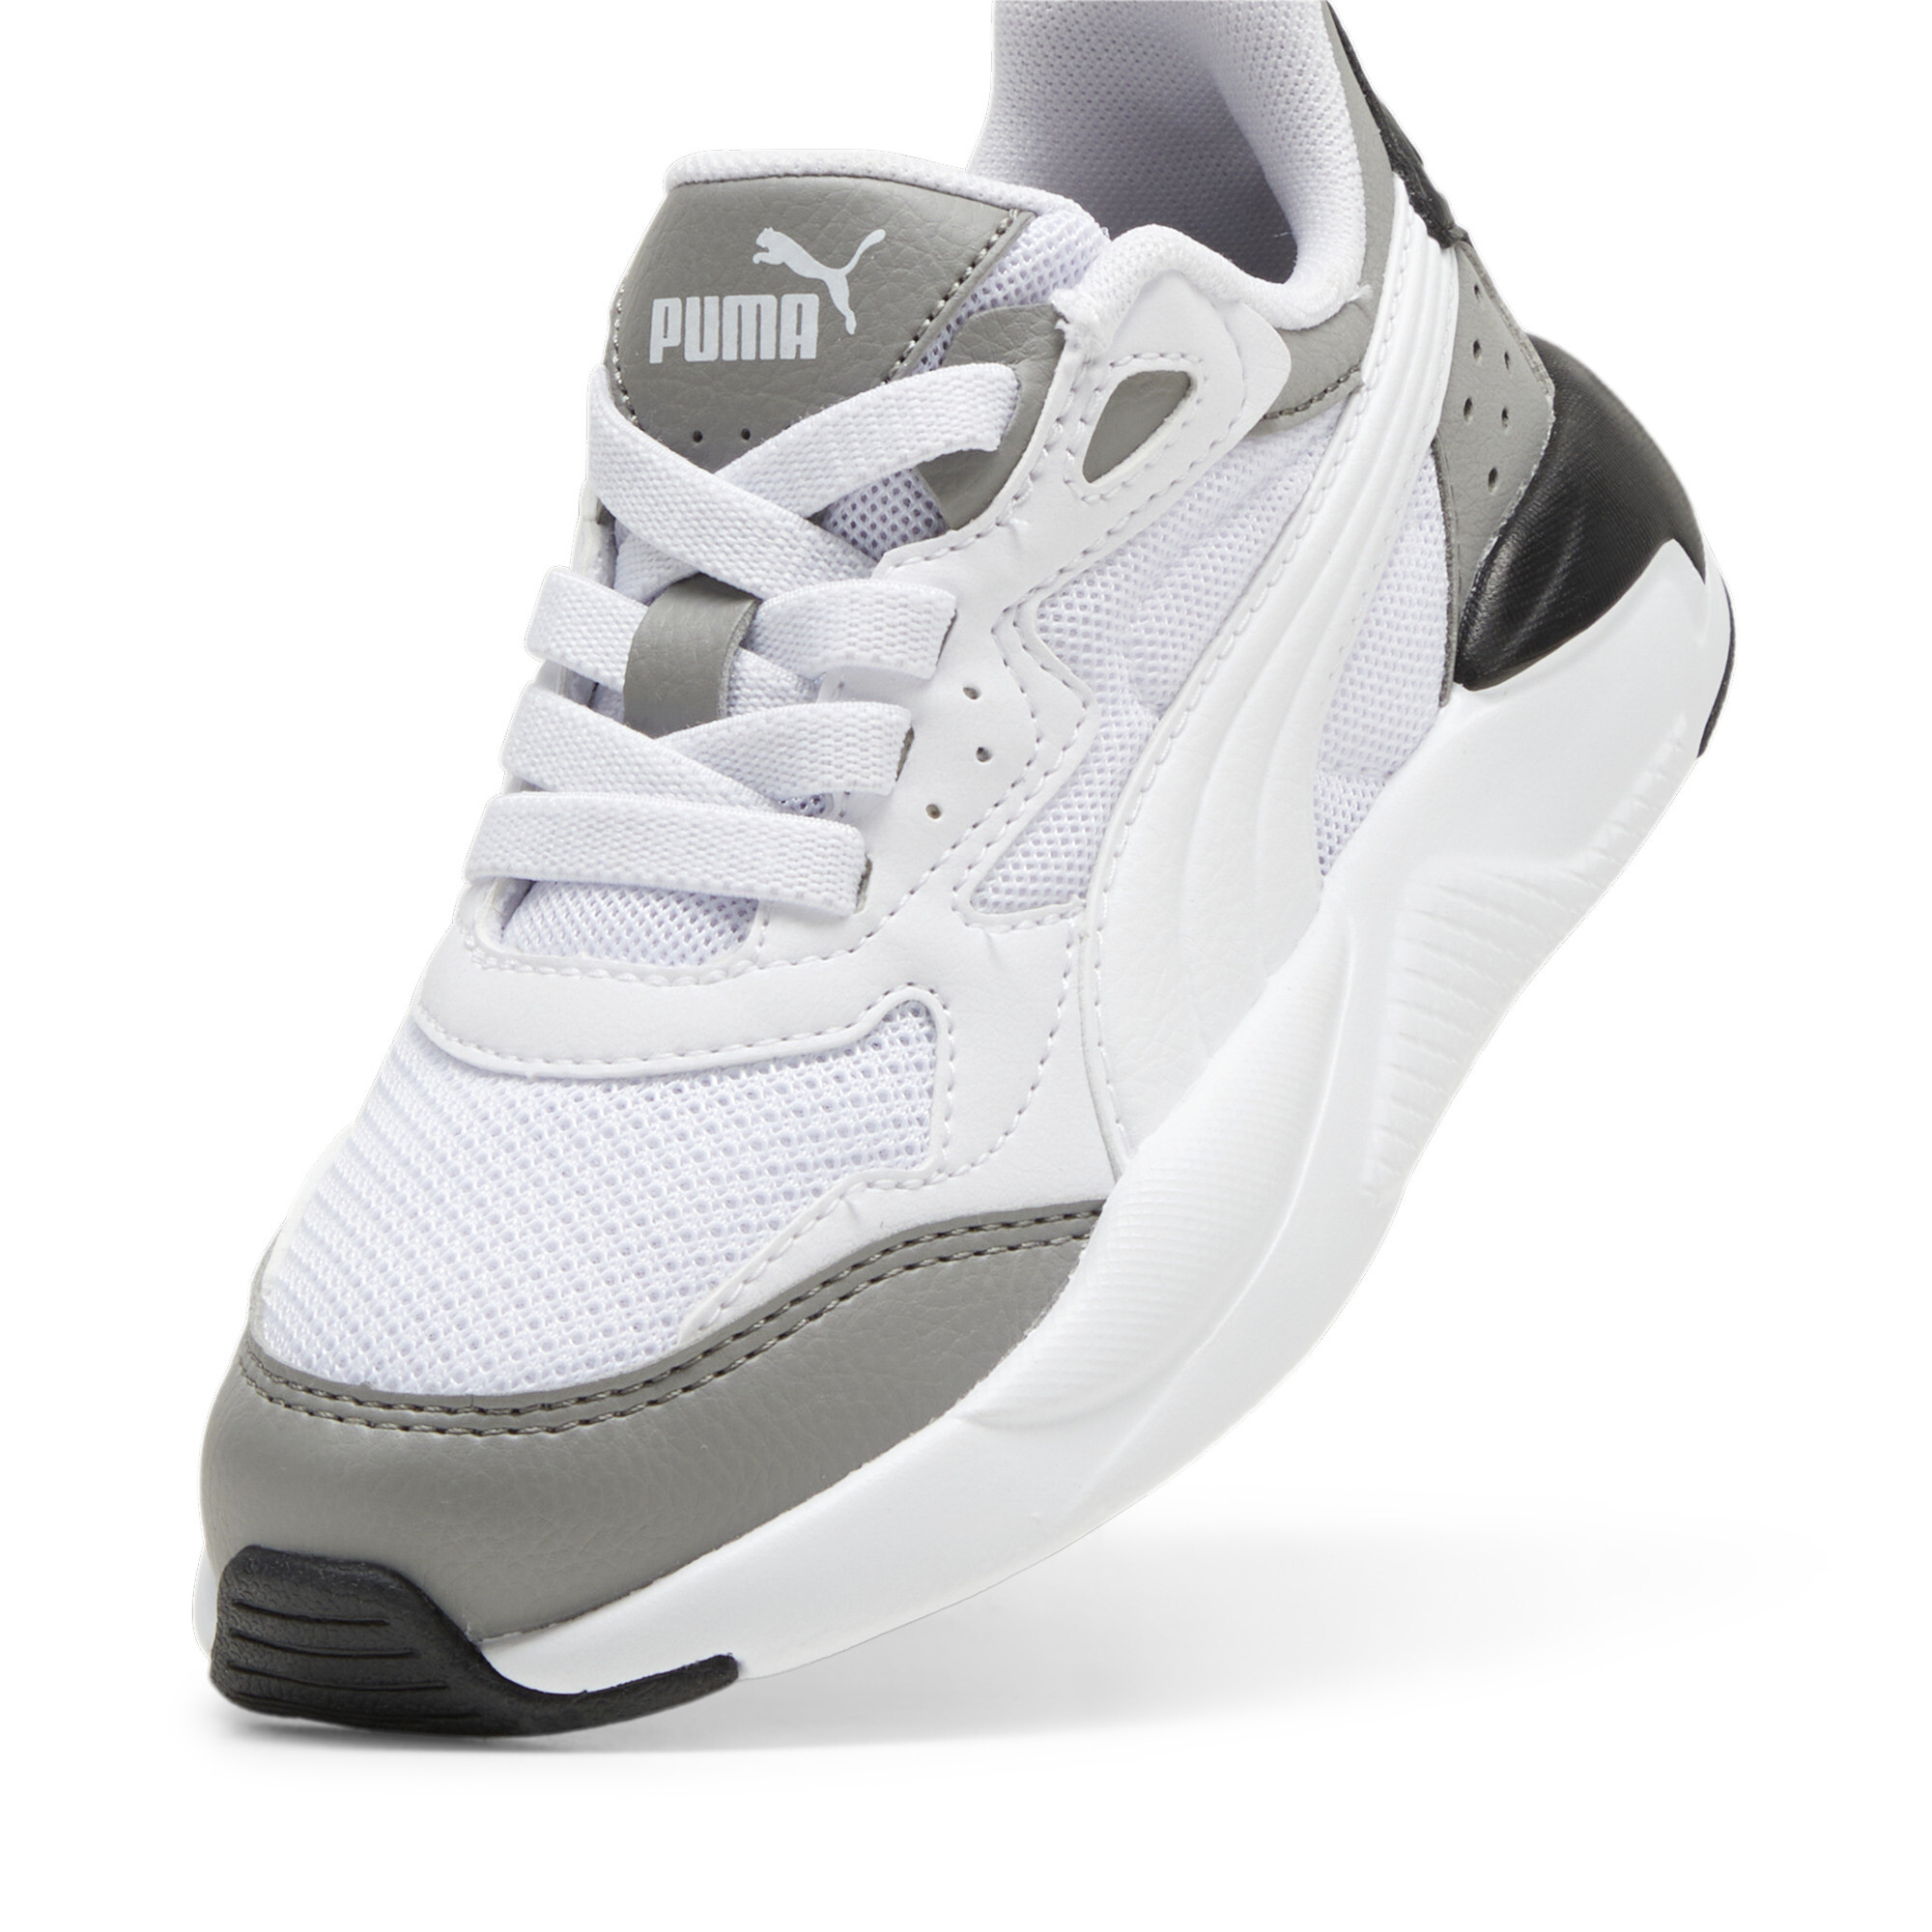 Puma X-Ray Speed AC Kids' Trainers, Gray, Size 35, Shoes